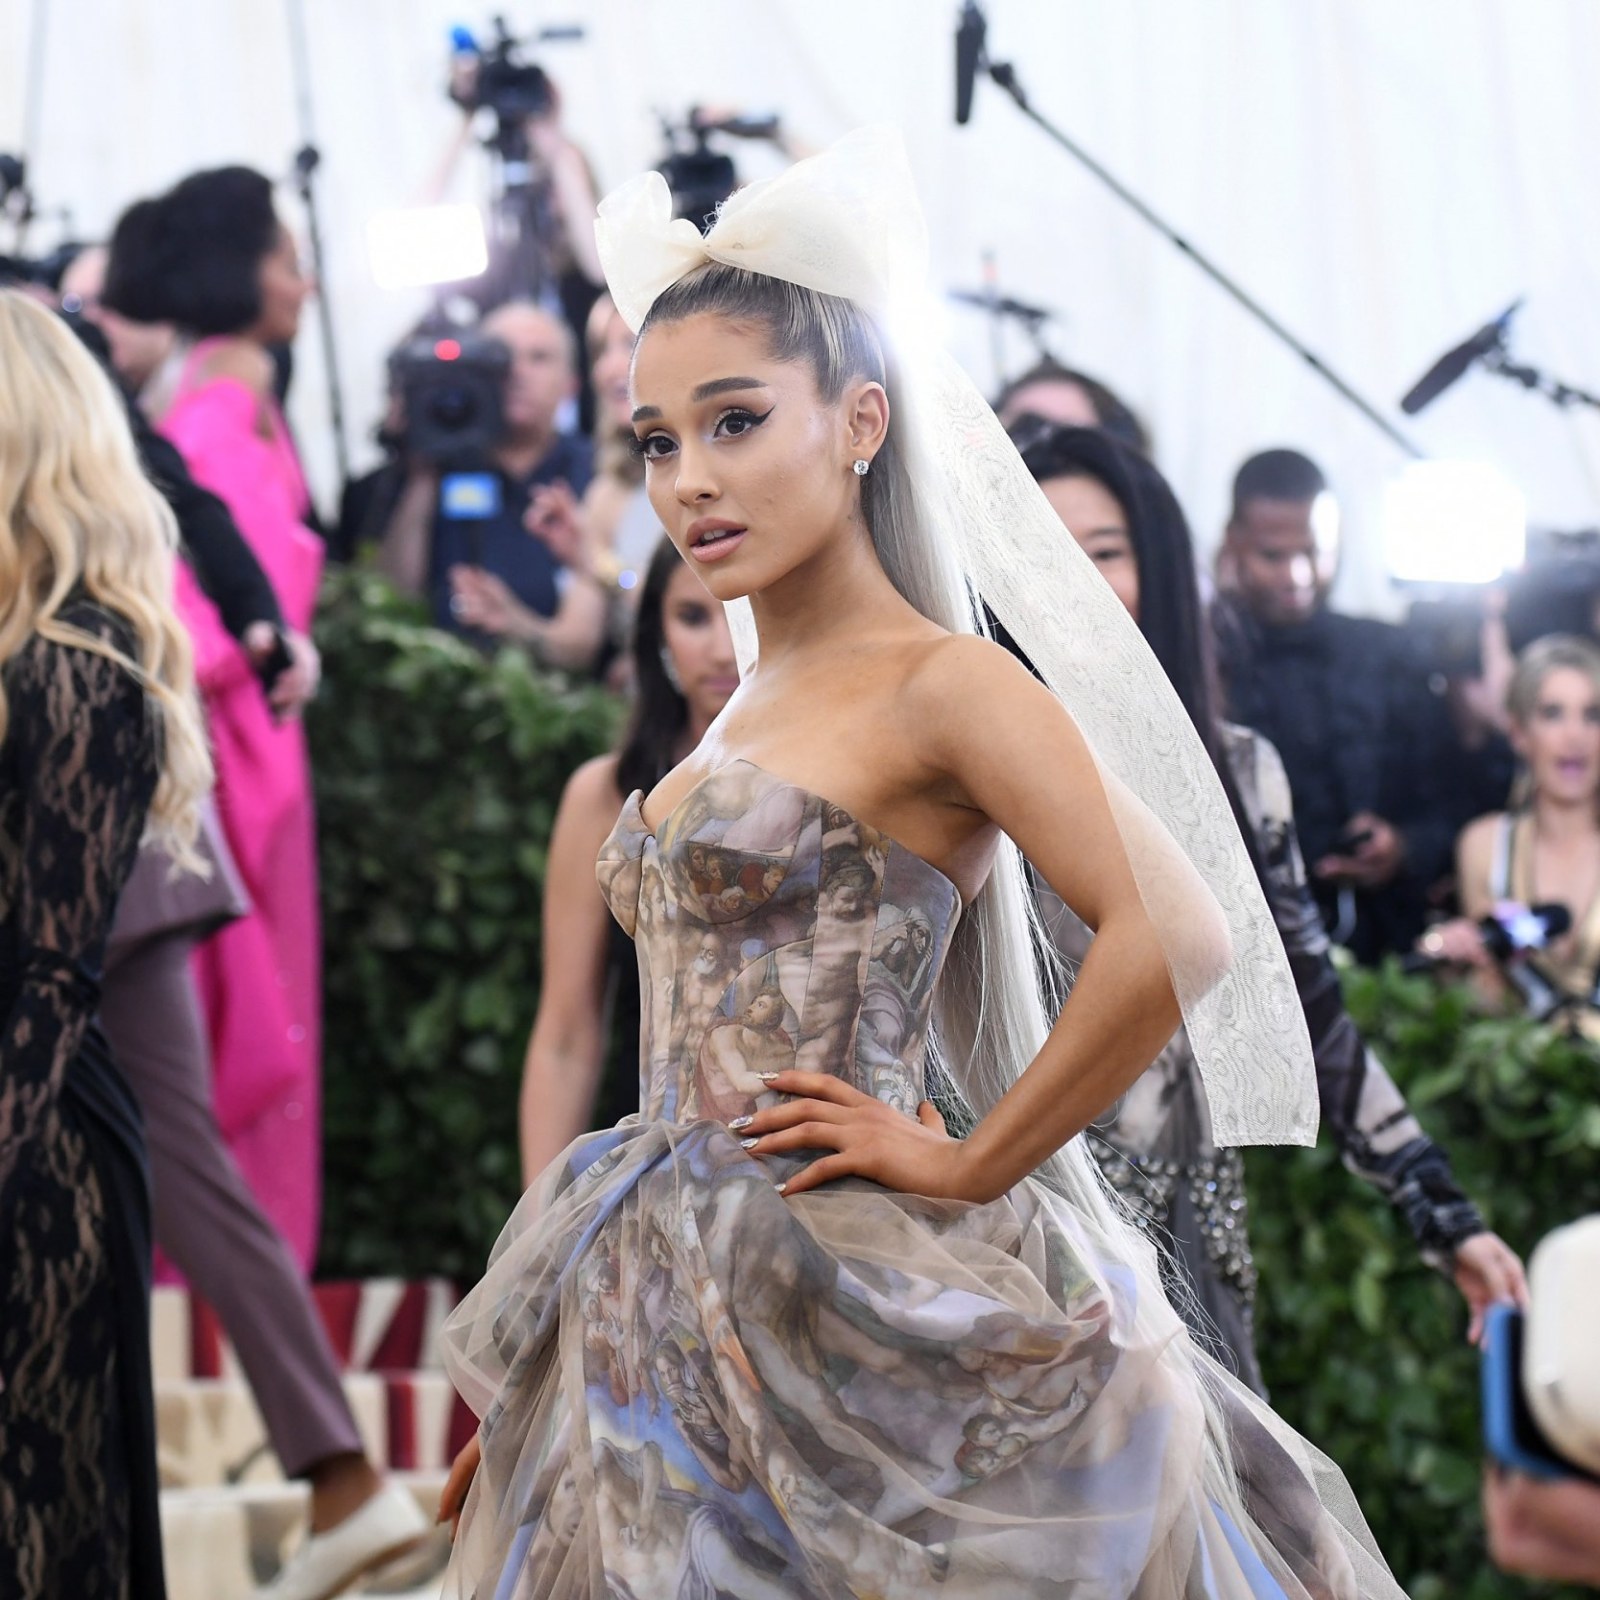 Why Did Ariana Grande And Mac Miller Break Up Singer Shares Update On Instagram Story Post